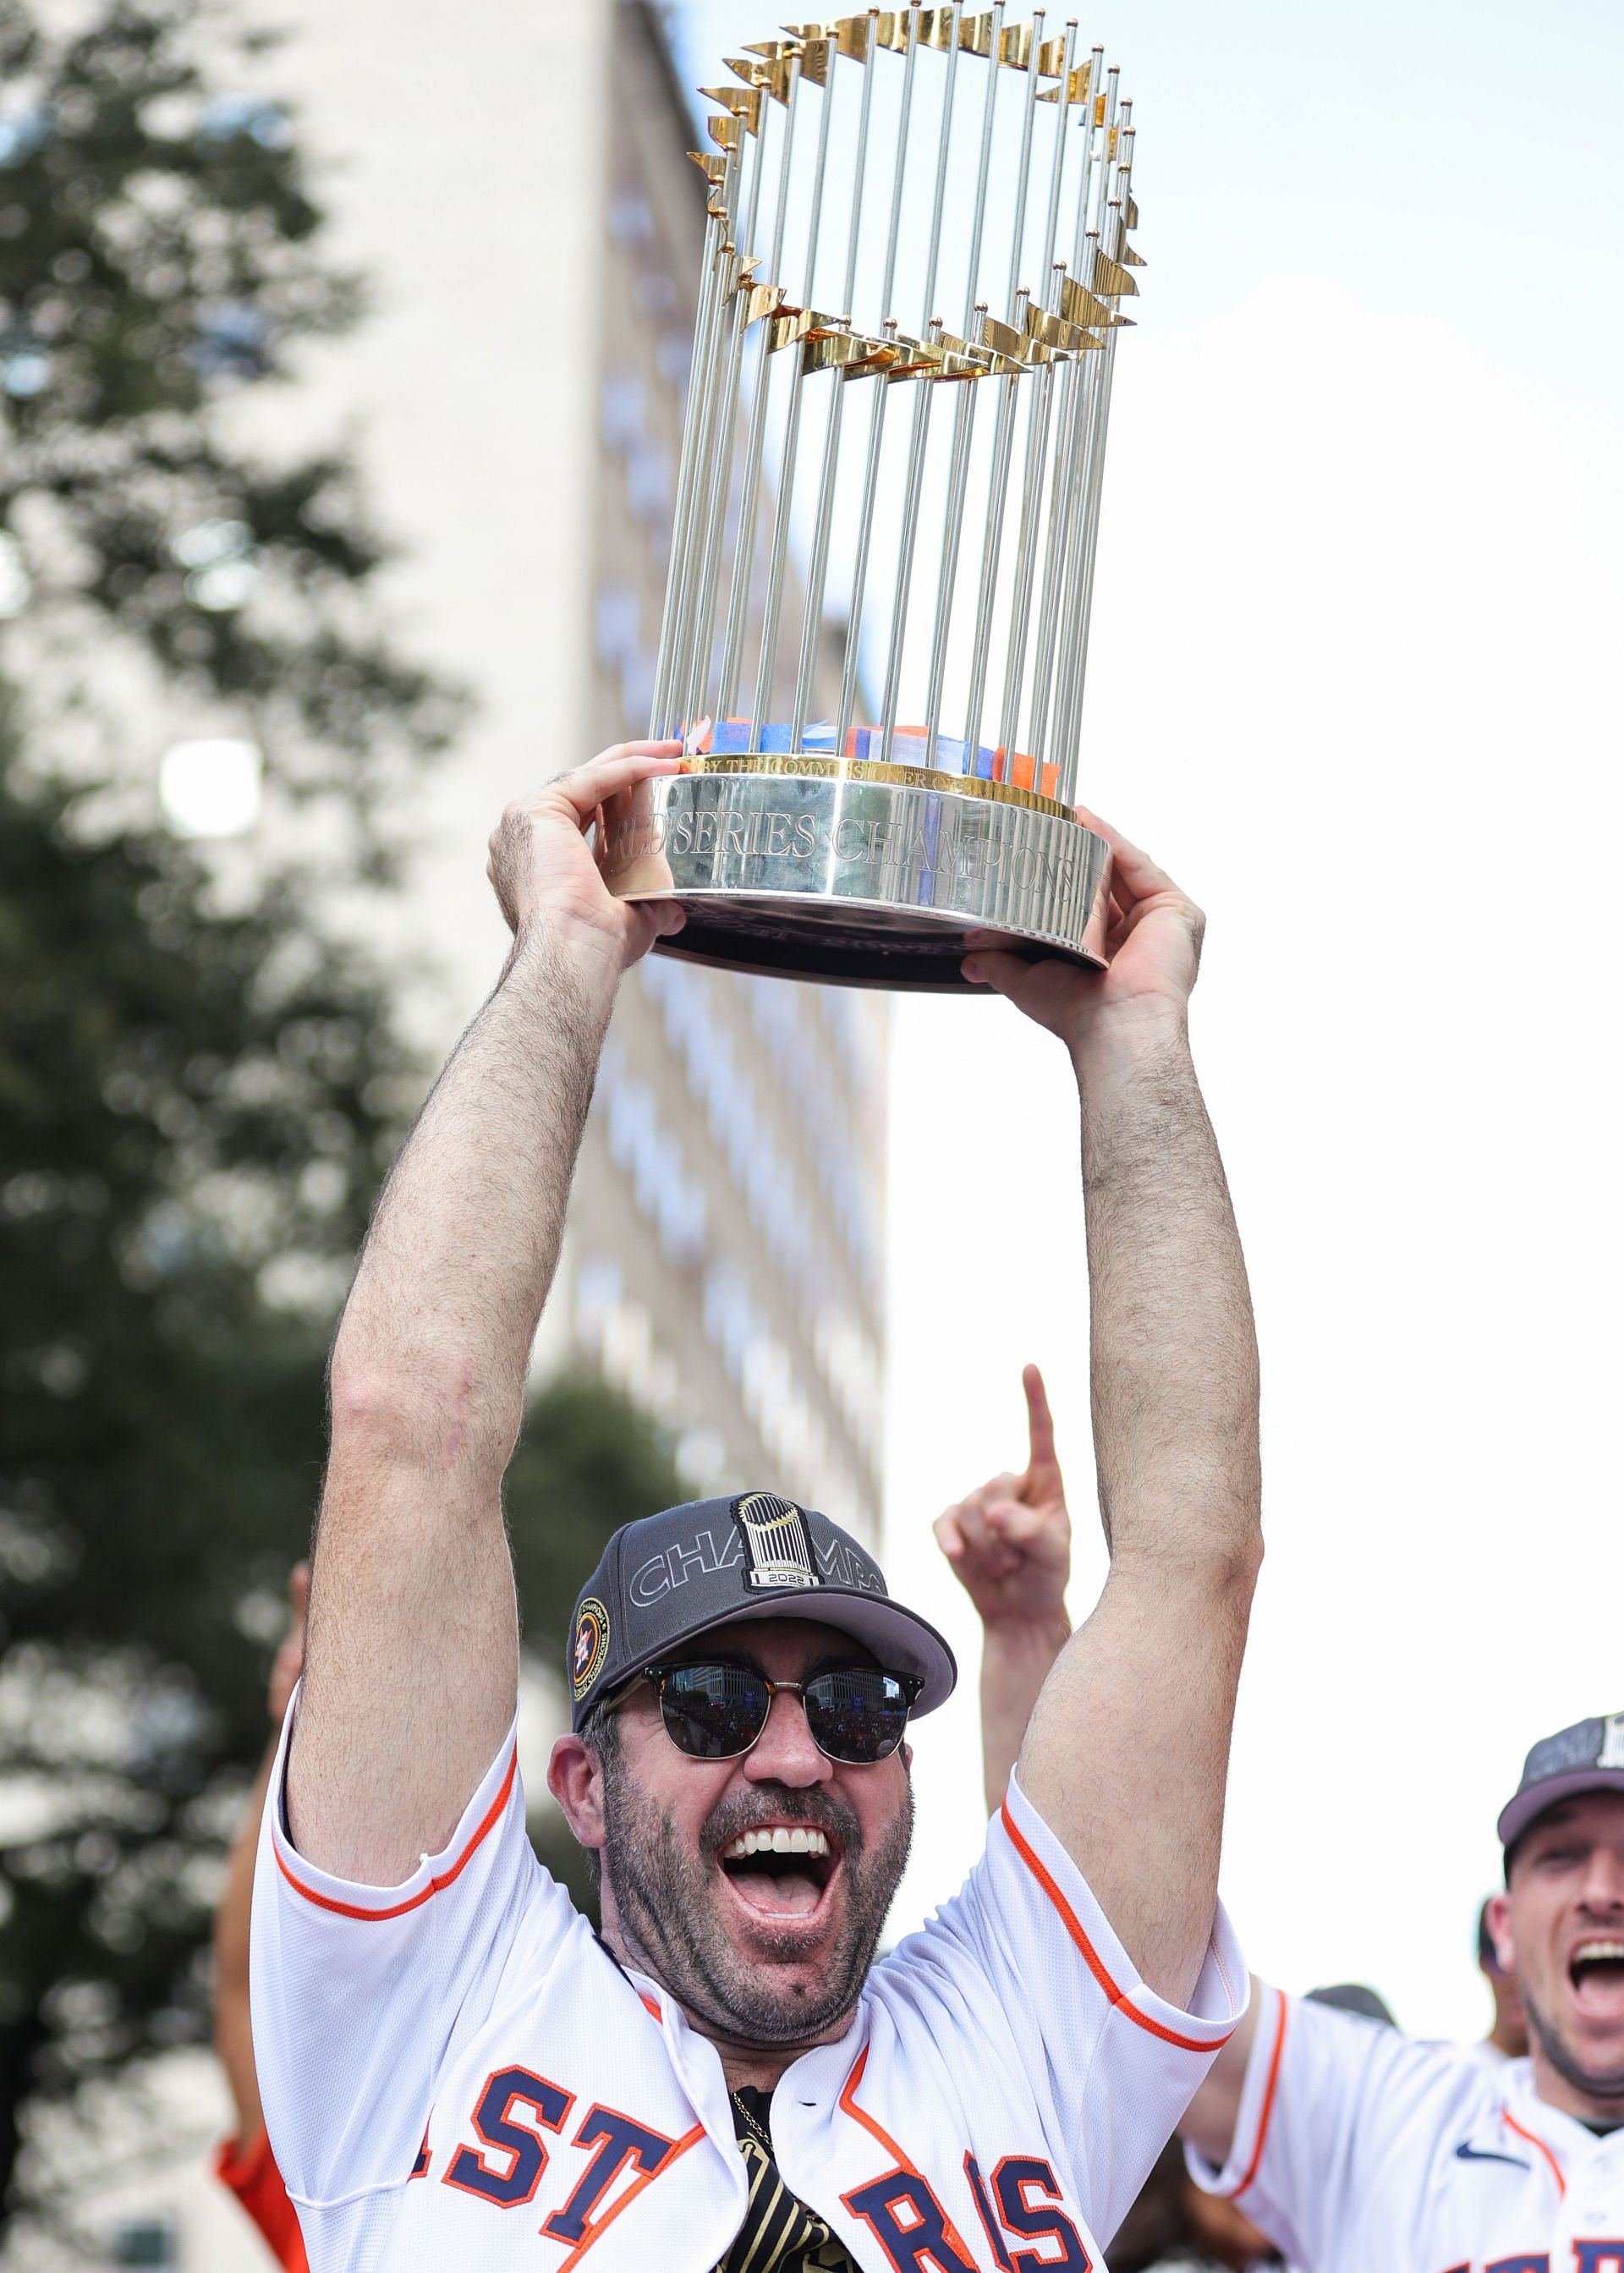 Justin Verlander #35 of the Houston Astros participates in the World Series Parade